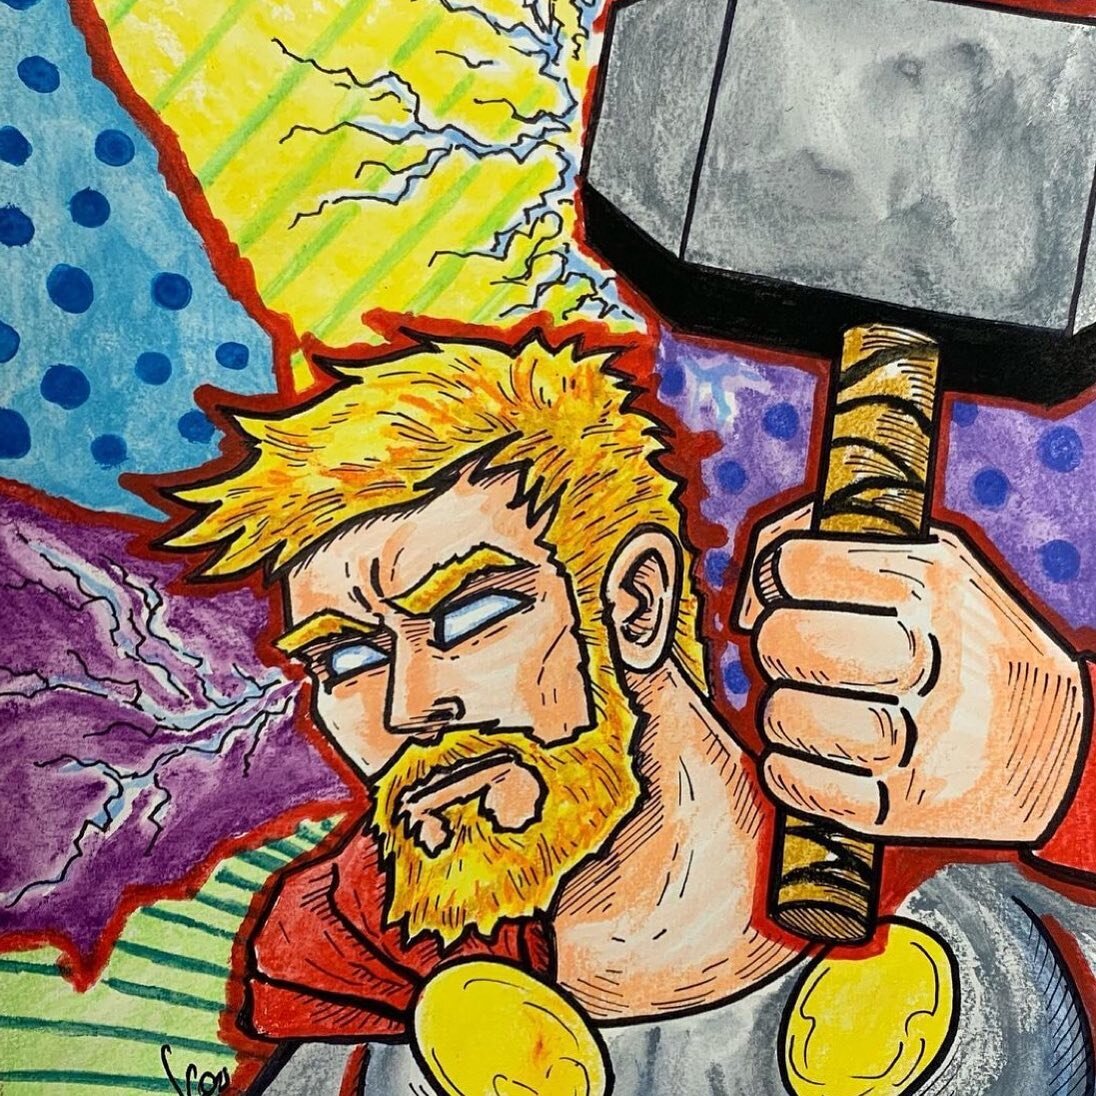 Repost from @awyeahfranco
&bull;
Thor Ragnarok! My artwork from last night&rsquo;s episode of Catchin&rsquo;Up with Franco! #catchinupwithfranco #Thor #marvelcomics #francodoodle

Catch all past episodes (free to view) and artwork on Patreon.com/Fran